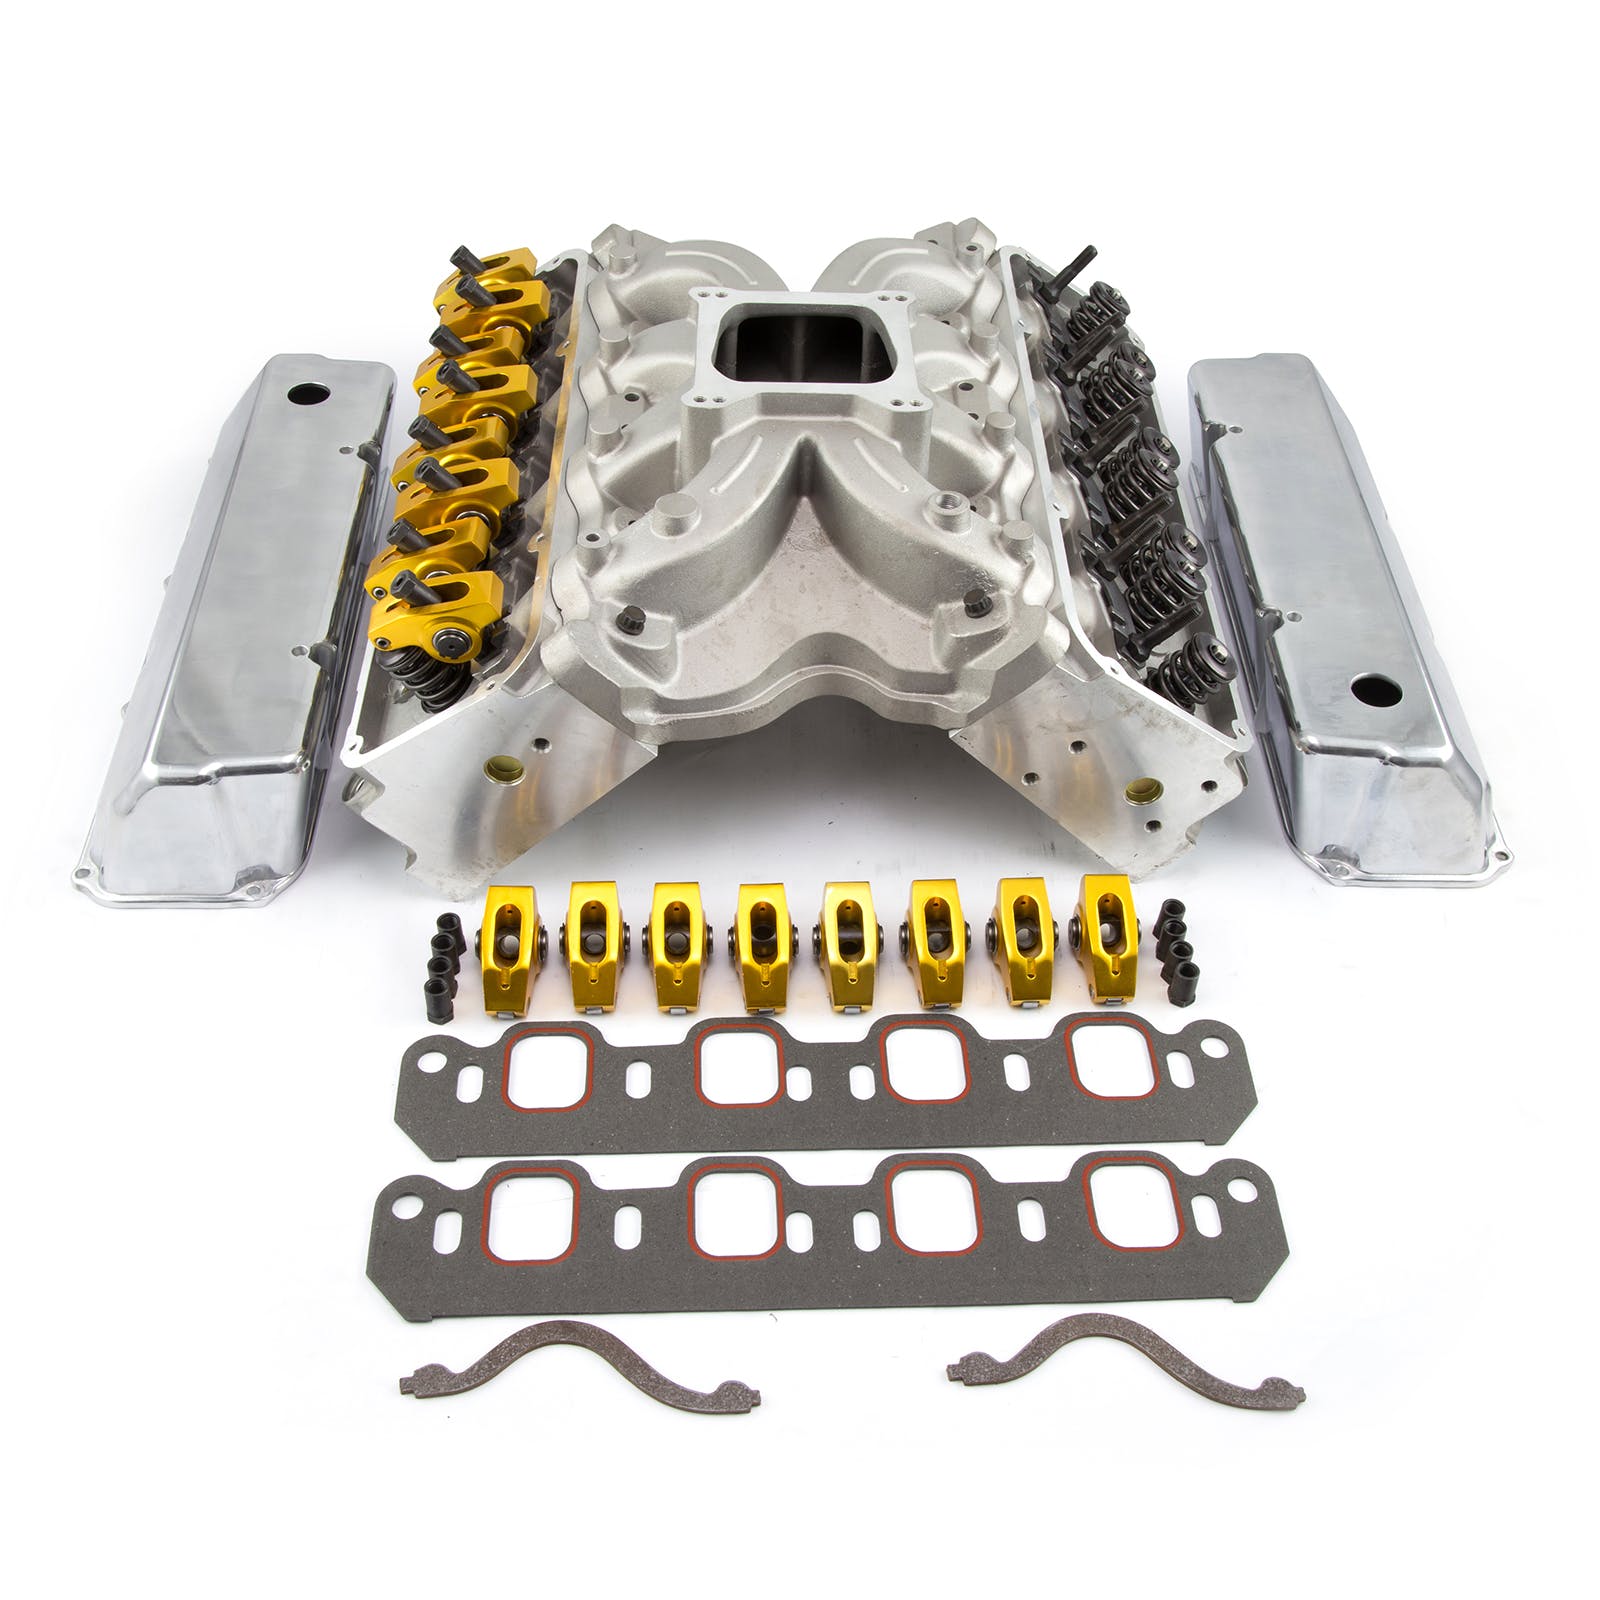 Speedmaster PCE435.1041 Solid FT Cylinder Head Top End Engine Combo Kit